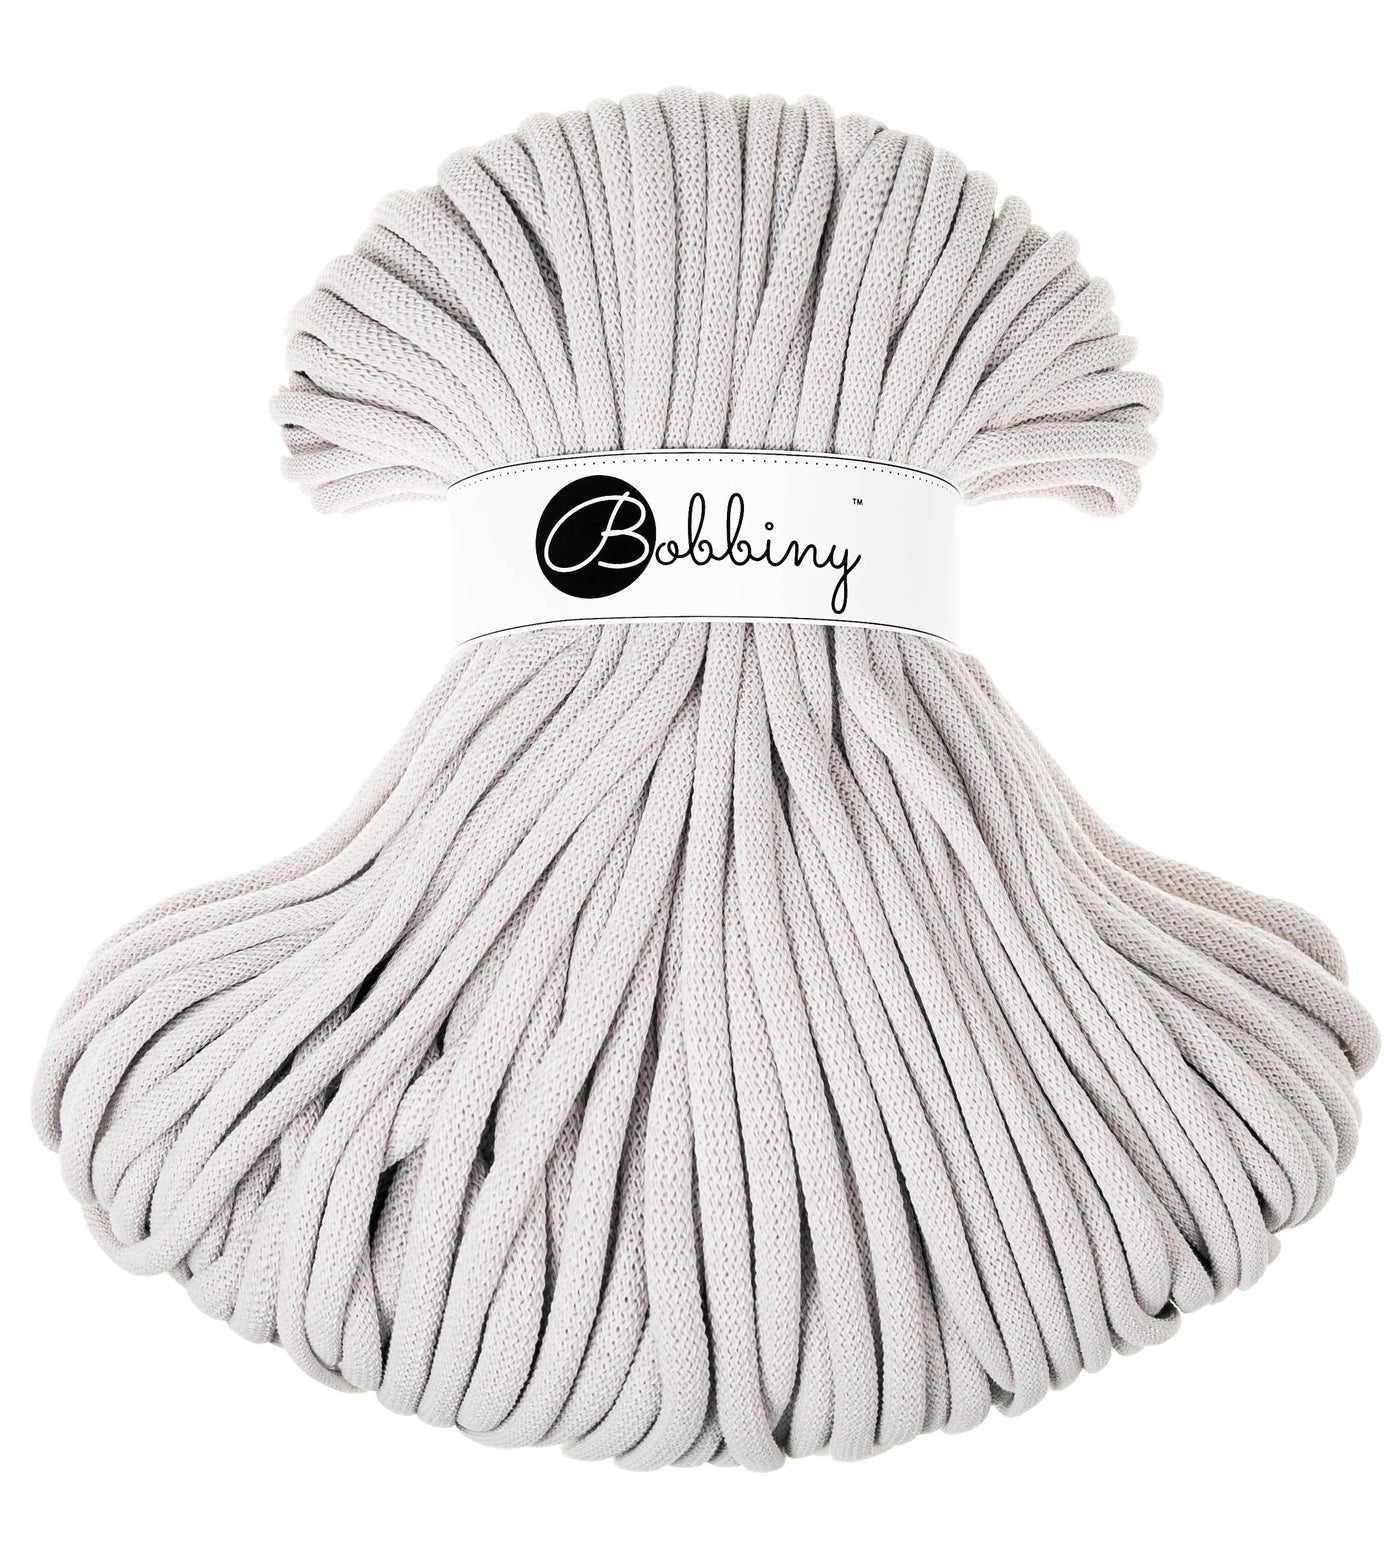 These gorgeous Bobbiny cords are made in Poland from 100% recycled cottons and are non toxic and certified safe for children. 9mm Diameter  Length 100m  Recommended for use with 14-16mm crochet hooks or knitting needles.  Perfect for use with Macrame, Crochet or Knitting.